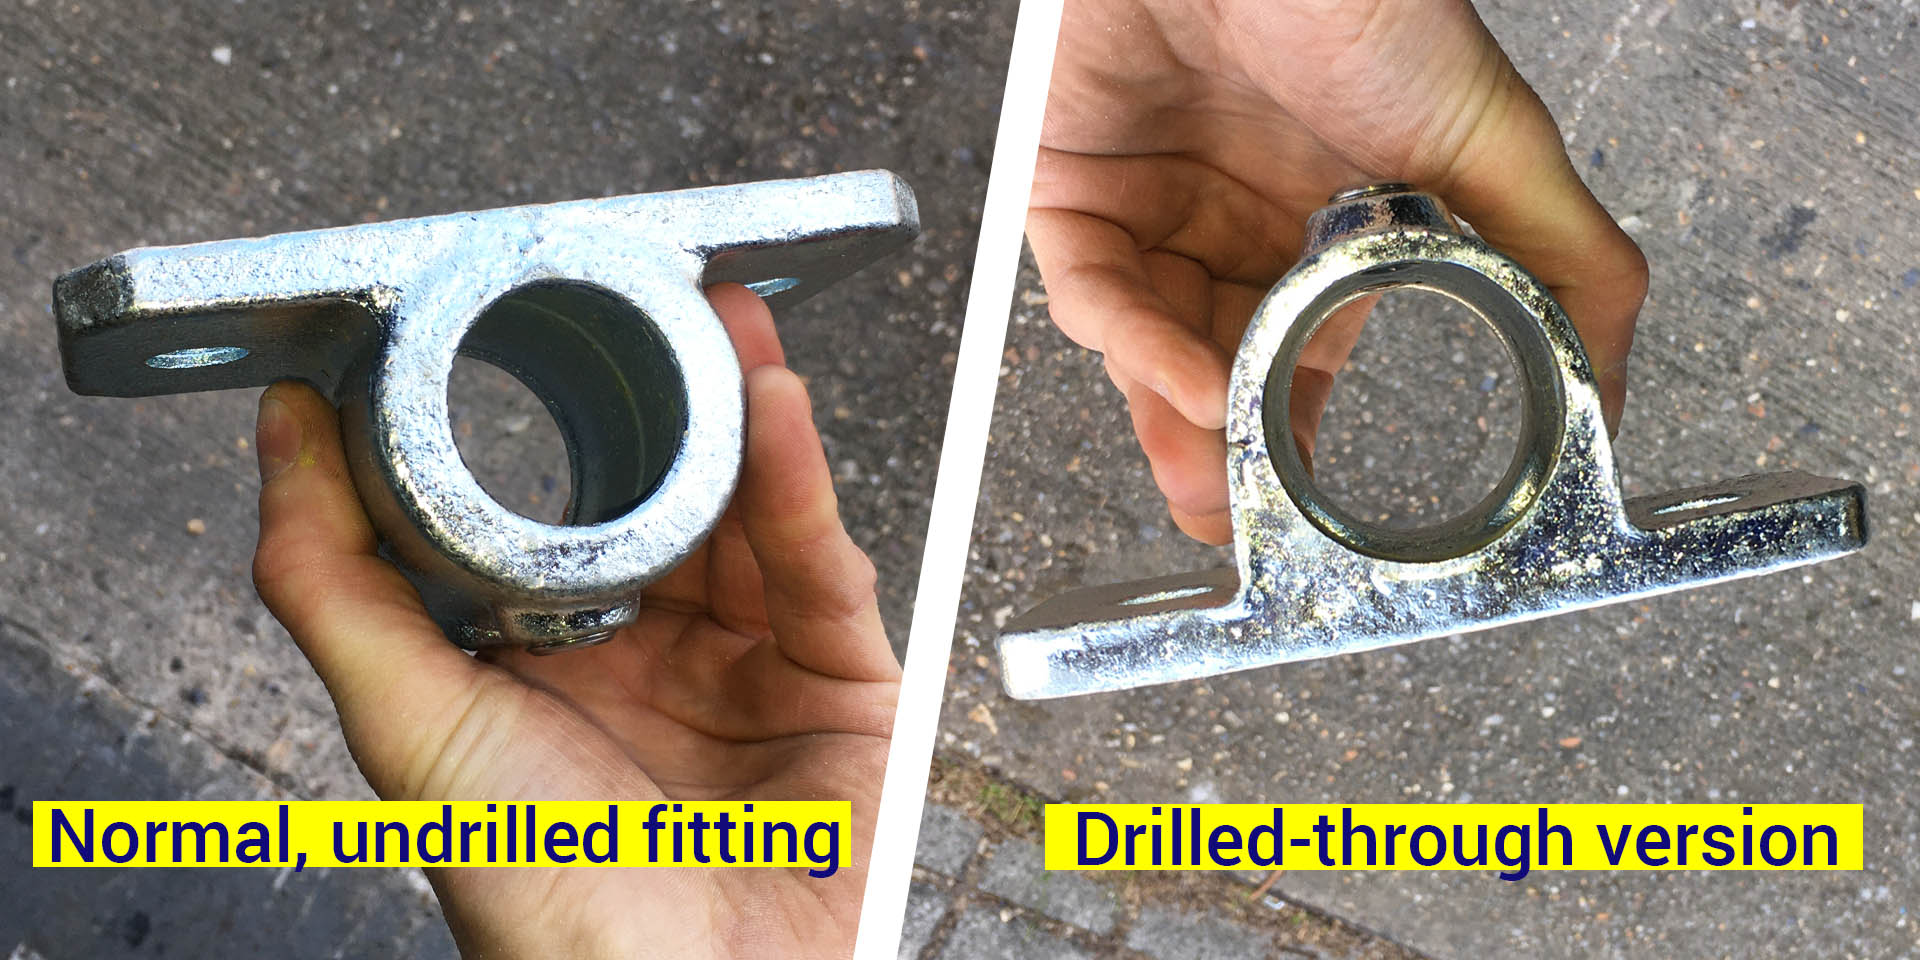 Comparing a normal undrilled tube clamp with a bored through version